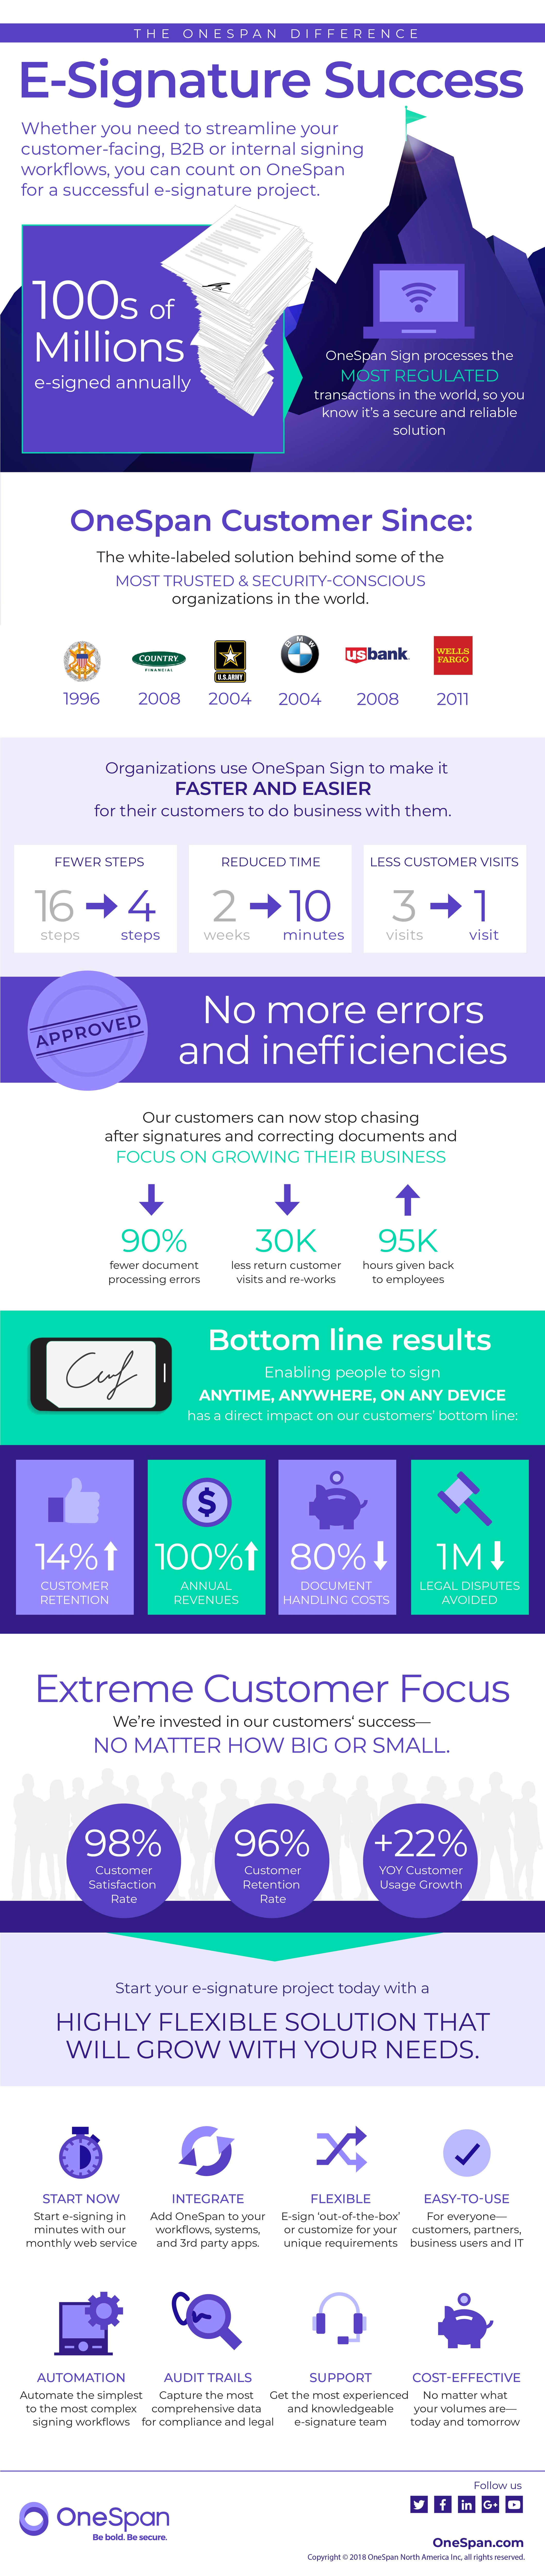 Onespan sign difference infographic